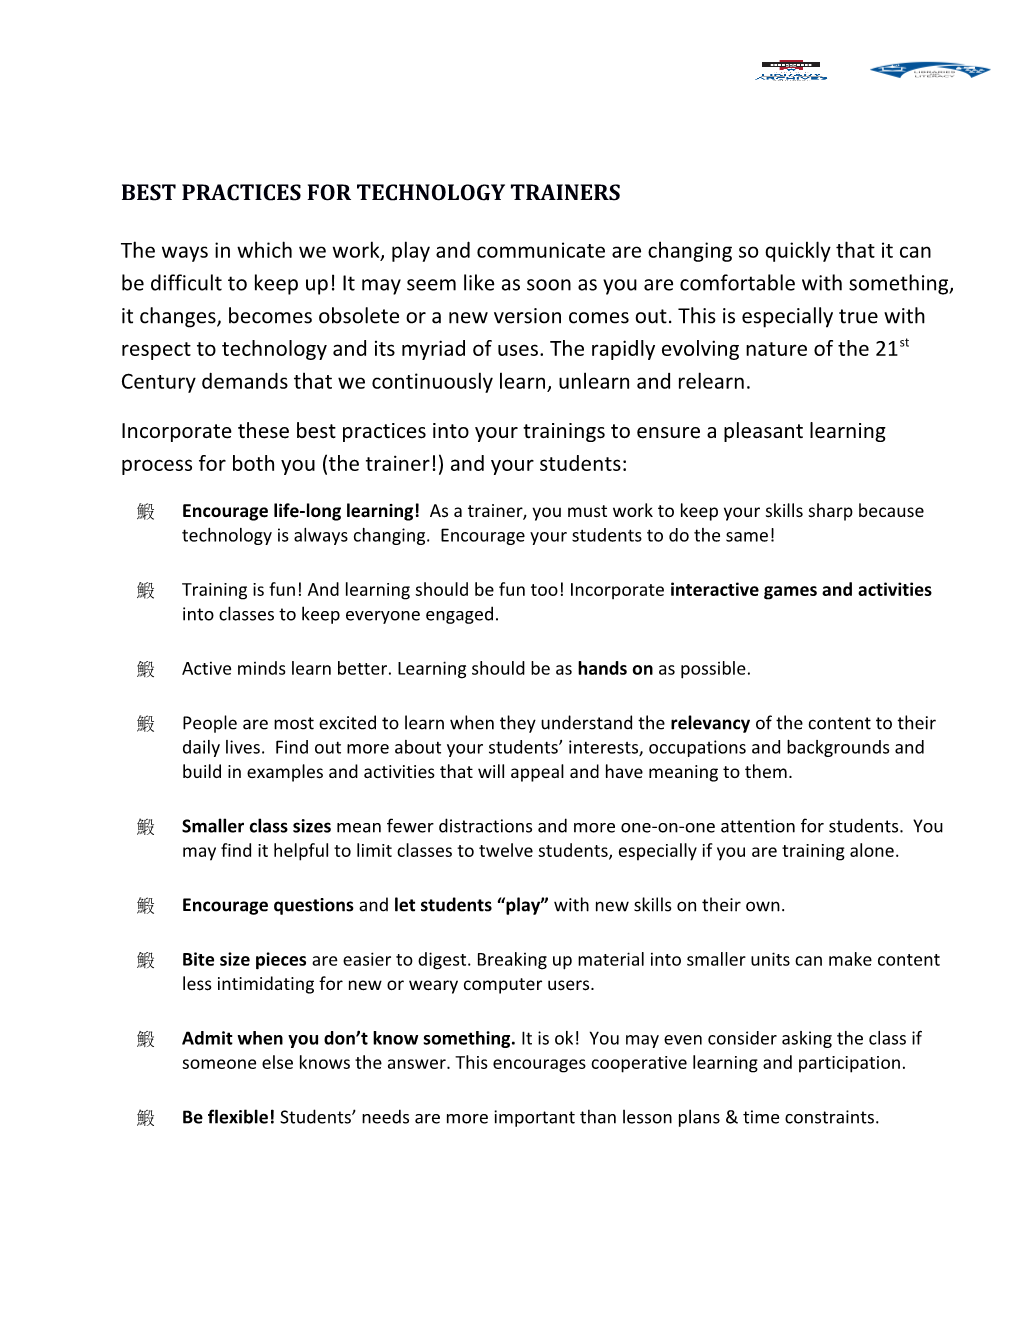 Best Practices for Technology Trainers